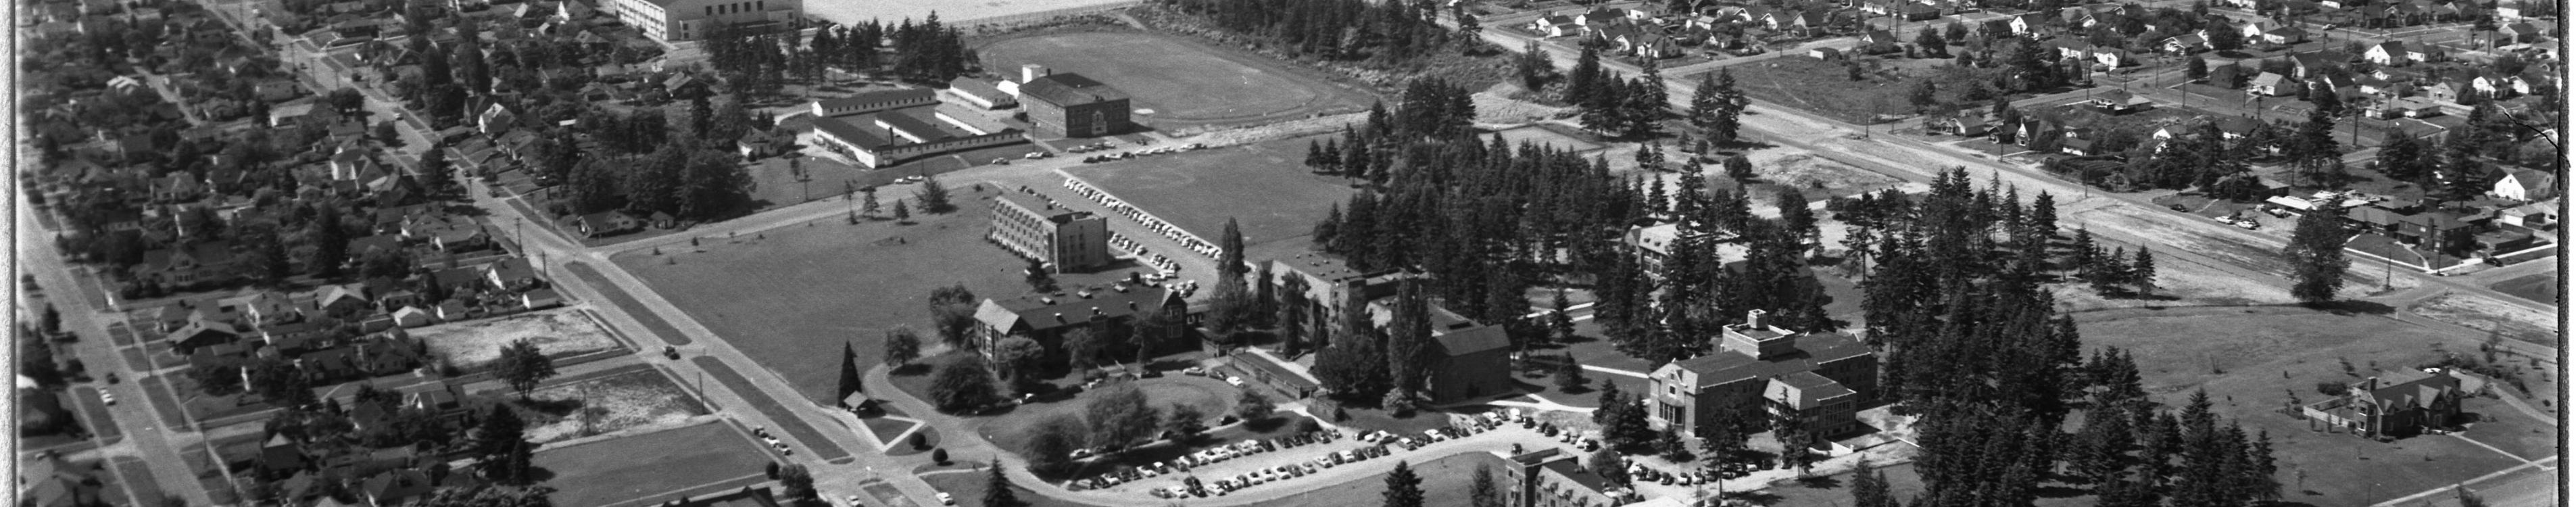 Aerial view of the College of Puget Sound, 1954.